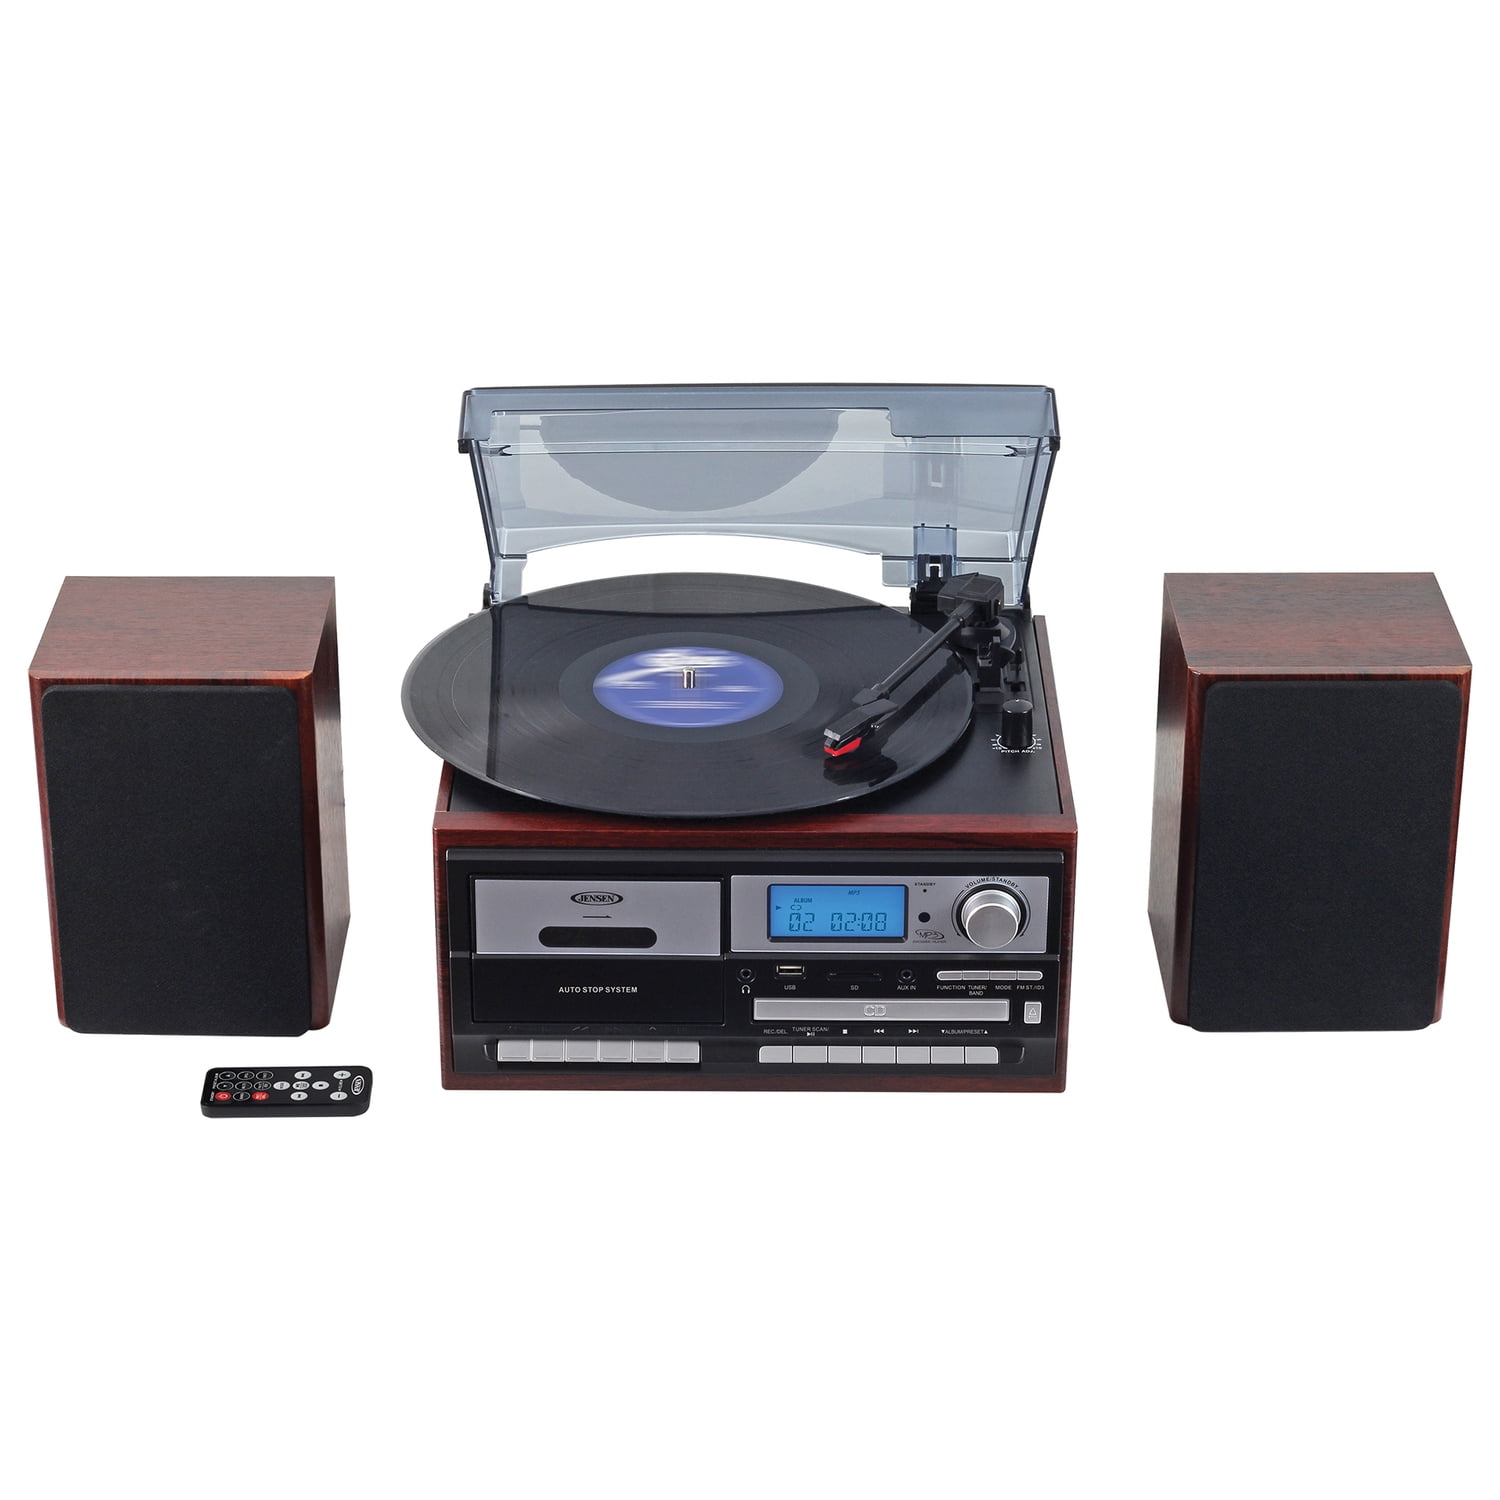 Jensen JTA-575 3-Speed 10-Watt Belt-Drive Turntable System with CD Player, Cassette  Player/Recorder, AM/FM Stereo Radio and Speakers